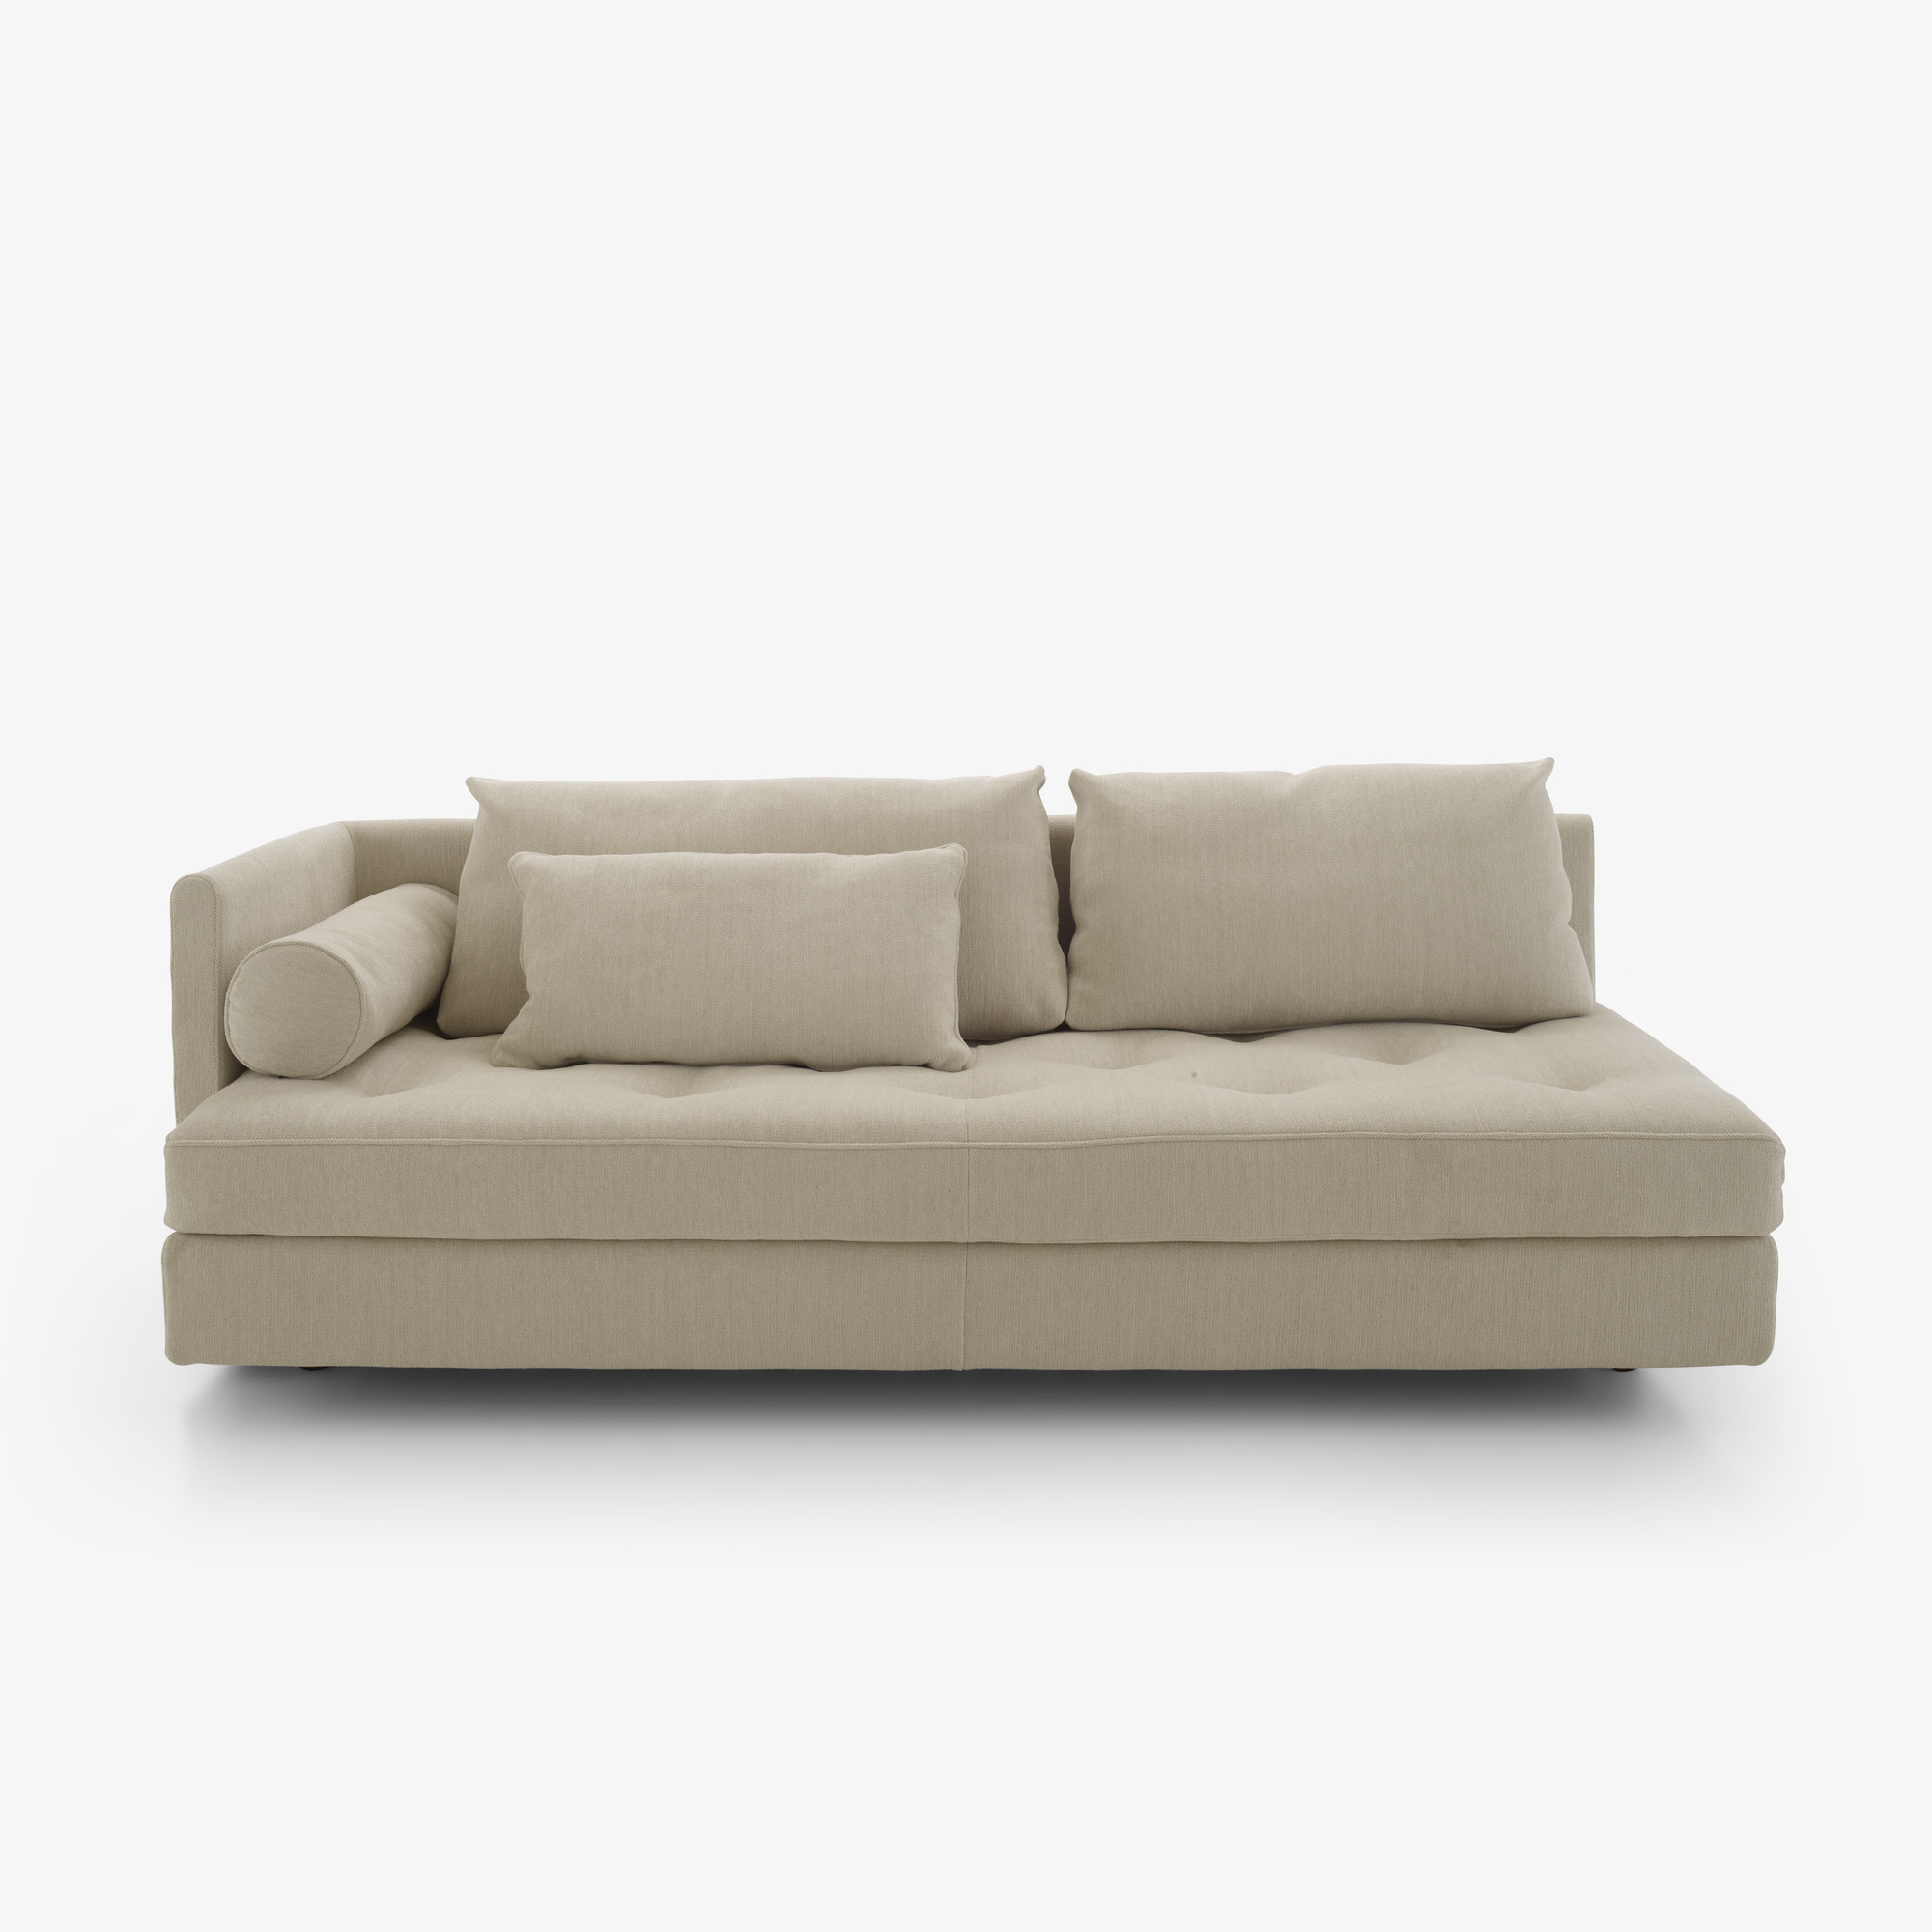 Image Large 1-armed settee 1